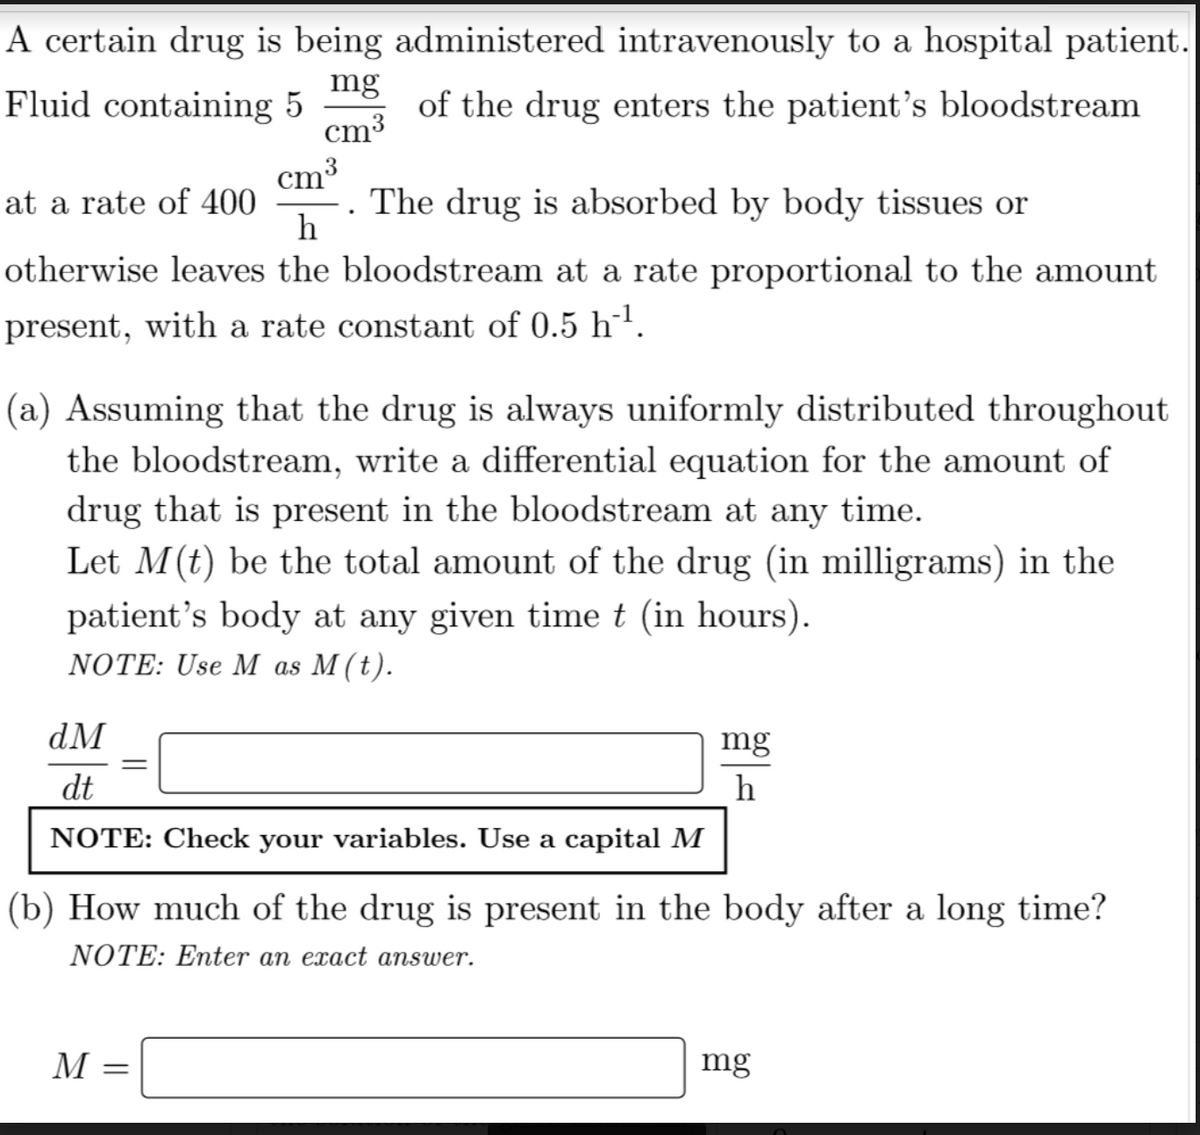 A certain drug is being administered intravenously to a hospital patient.
mg
Fluid containing 5
of the drug enters the patient's bloodstream
cm³
cm³
at a rate of 400 . The drug is absorbed by body tissues or
h
otherwise leaves the bloodstream at a rate proportional to the amount
present, with a rate constant of 0.5 h¨¹.
(a) Assuming that the drug is always uniformly distributed throughout
the bloodstream, write a differential equation for the amount of
drug that is present in the bloodstream at any time.
Let M(t) be the total amount of the drug (in milligrams) in the
patient's body at any given time t (in hours).
NOTE: Use M as M(t).
dM
dt
NOTE: Check your variables. Use a capital M
=
mg
h
(b) How much of the drug is present in the body after a long time?
NOTE: Enter an exact answer.
M =
mg